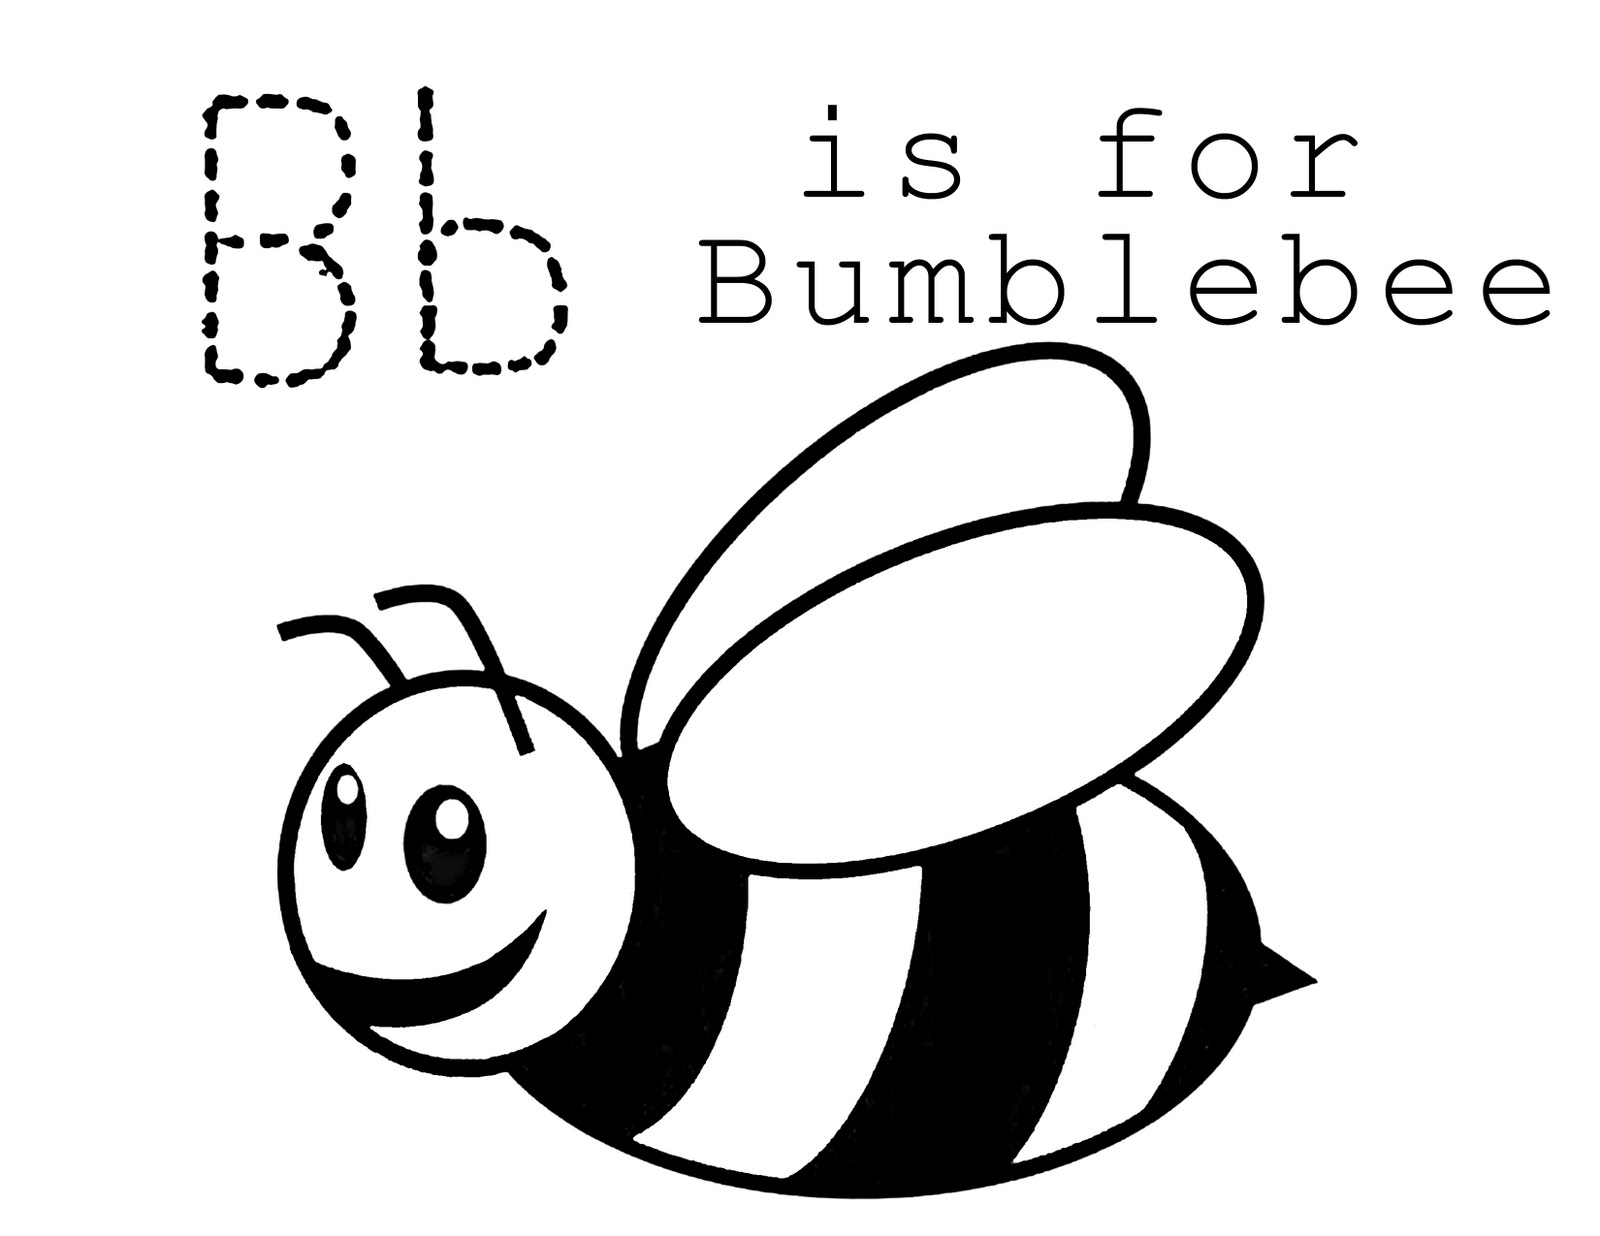 Bumble Bee Embroidery Pattern Items Similar To Bumble Bee Applique Machine Embroidery Pattern